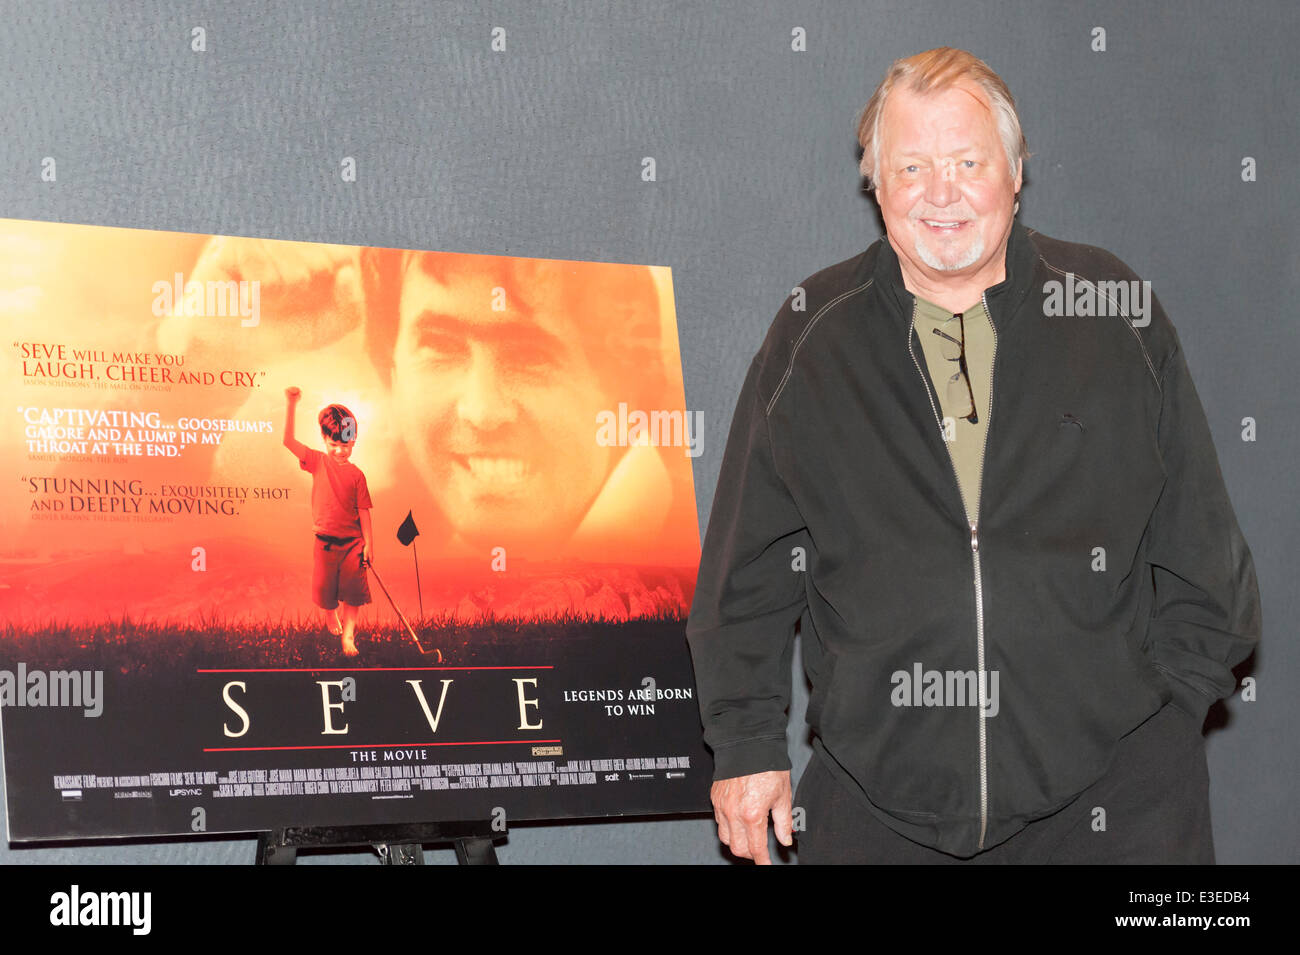 Empire Cinema, Leicester Square, London, UK. 23rd June 2014. Cast and celebrities attend the movie premiere “Seve” which opened at the Empire Cinema in Leicester Square, London. The motion picture tells the story of Seve Ballesteros who fought against adversity to become one of the most spectacular and charismatic golfers to ever play the game. Pictured: DAVID SOUL. Credit:  Lee Thomas/Alamy Live News Stock Photo